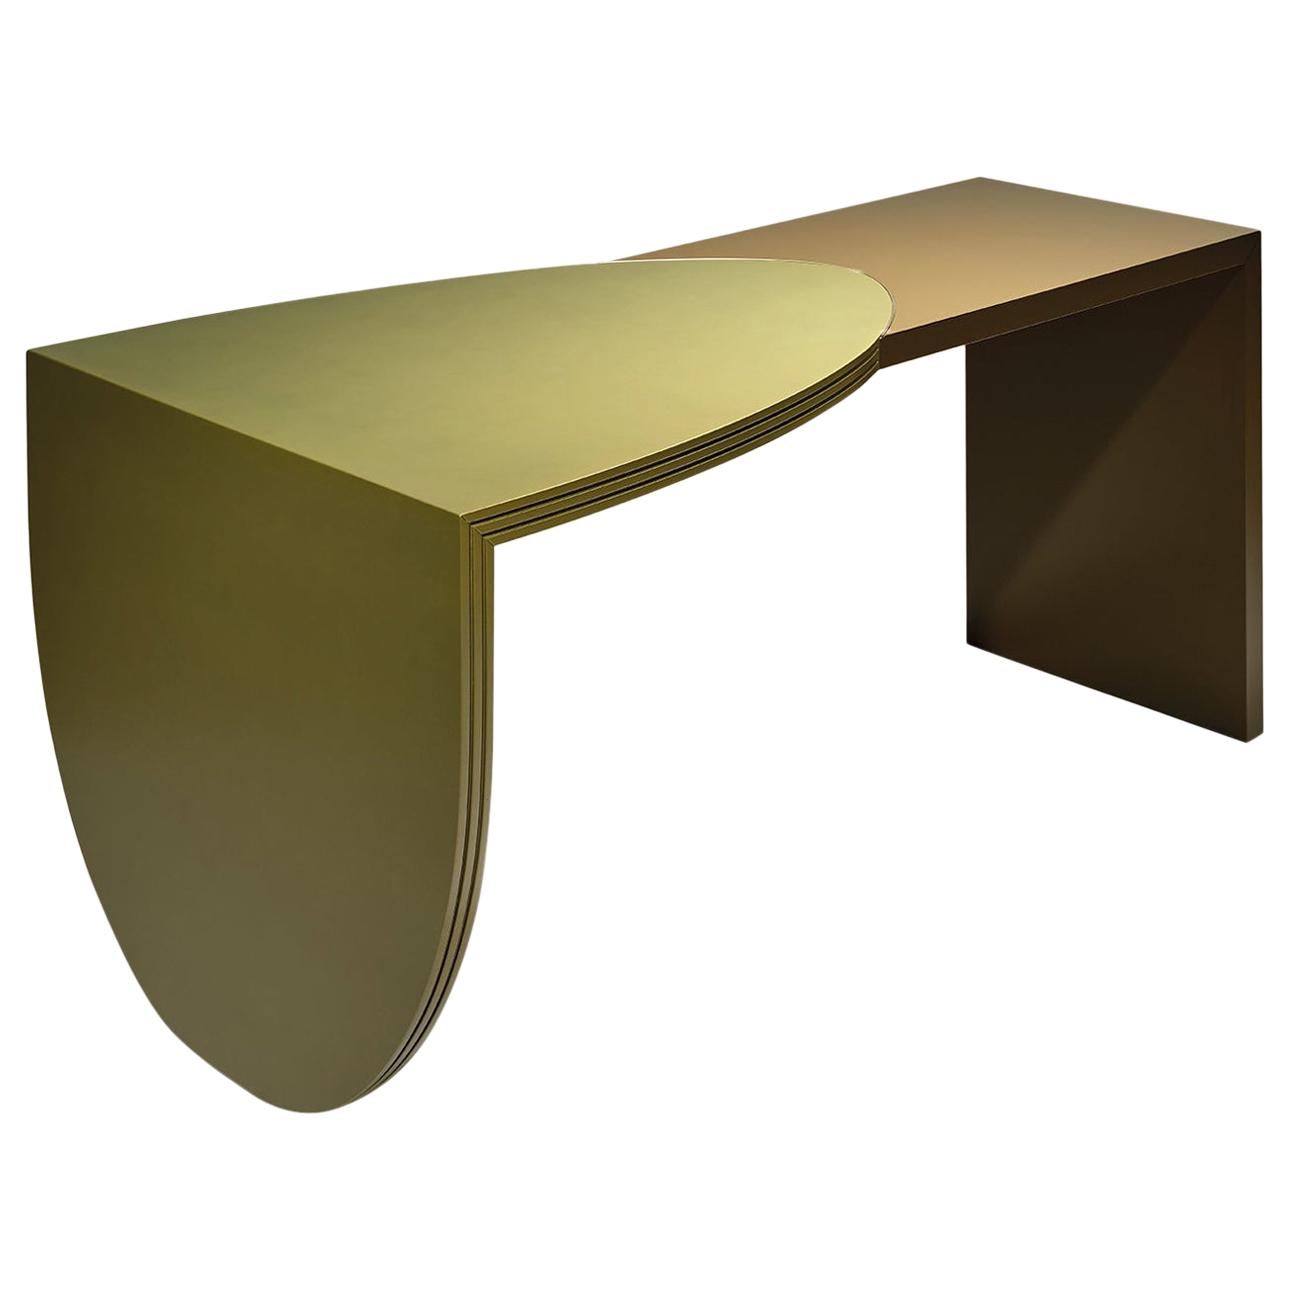 Akoya Contemporary Lacquer Table Desk with Bronze Trim Inlay by Luísa Peixoto